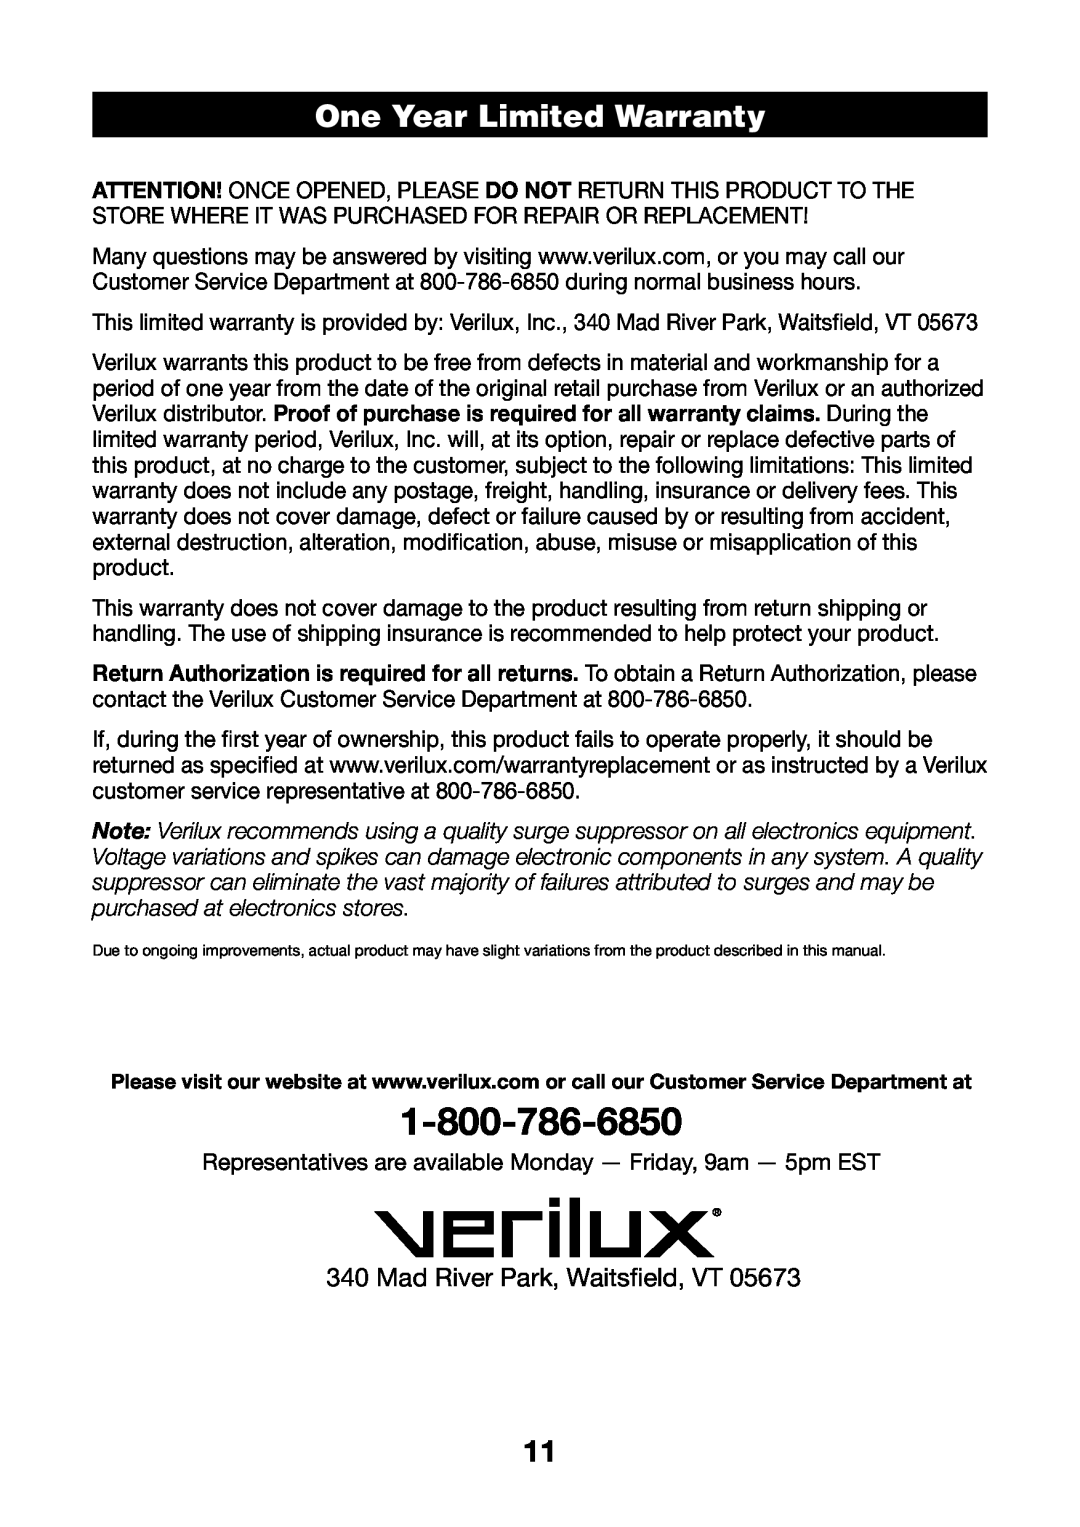 Verilux PL03 manual One Year Limited Warranty, Mad River Park, Waitsfield, VT 